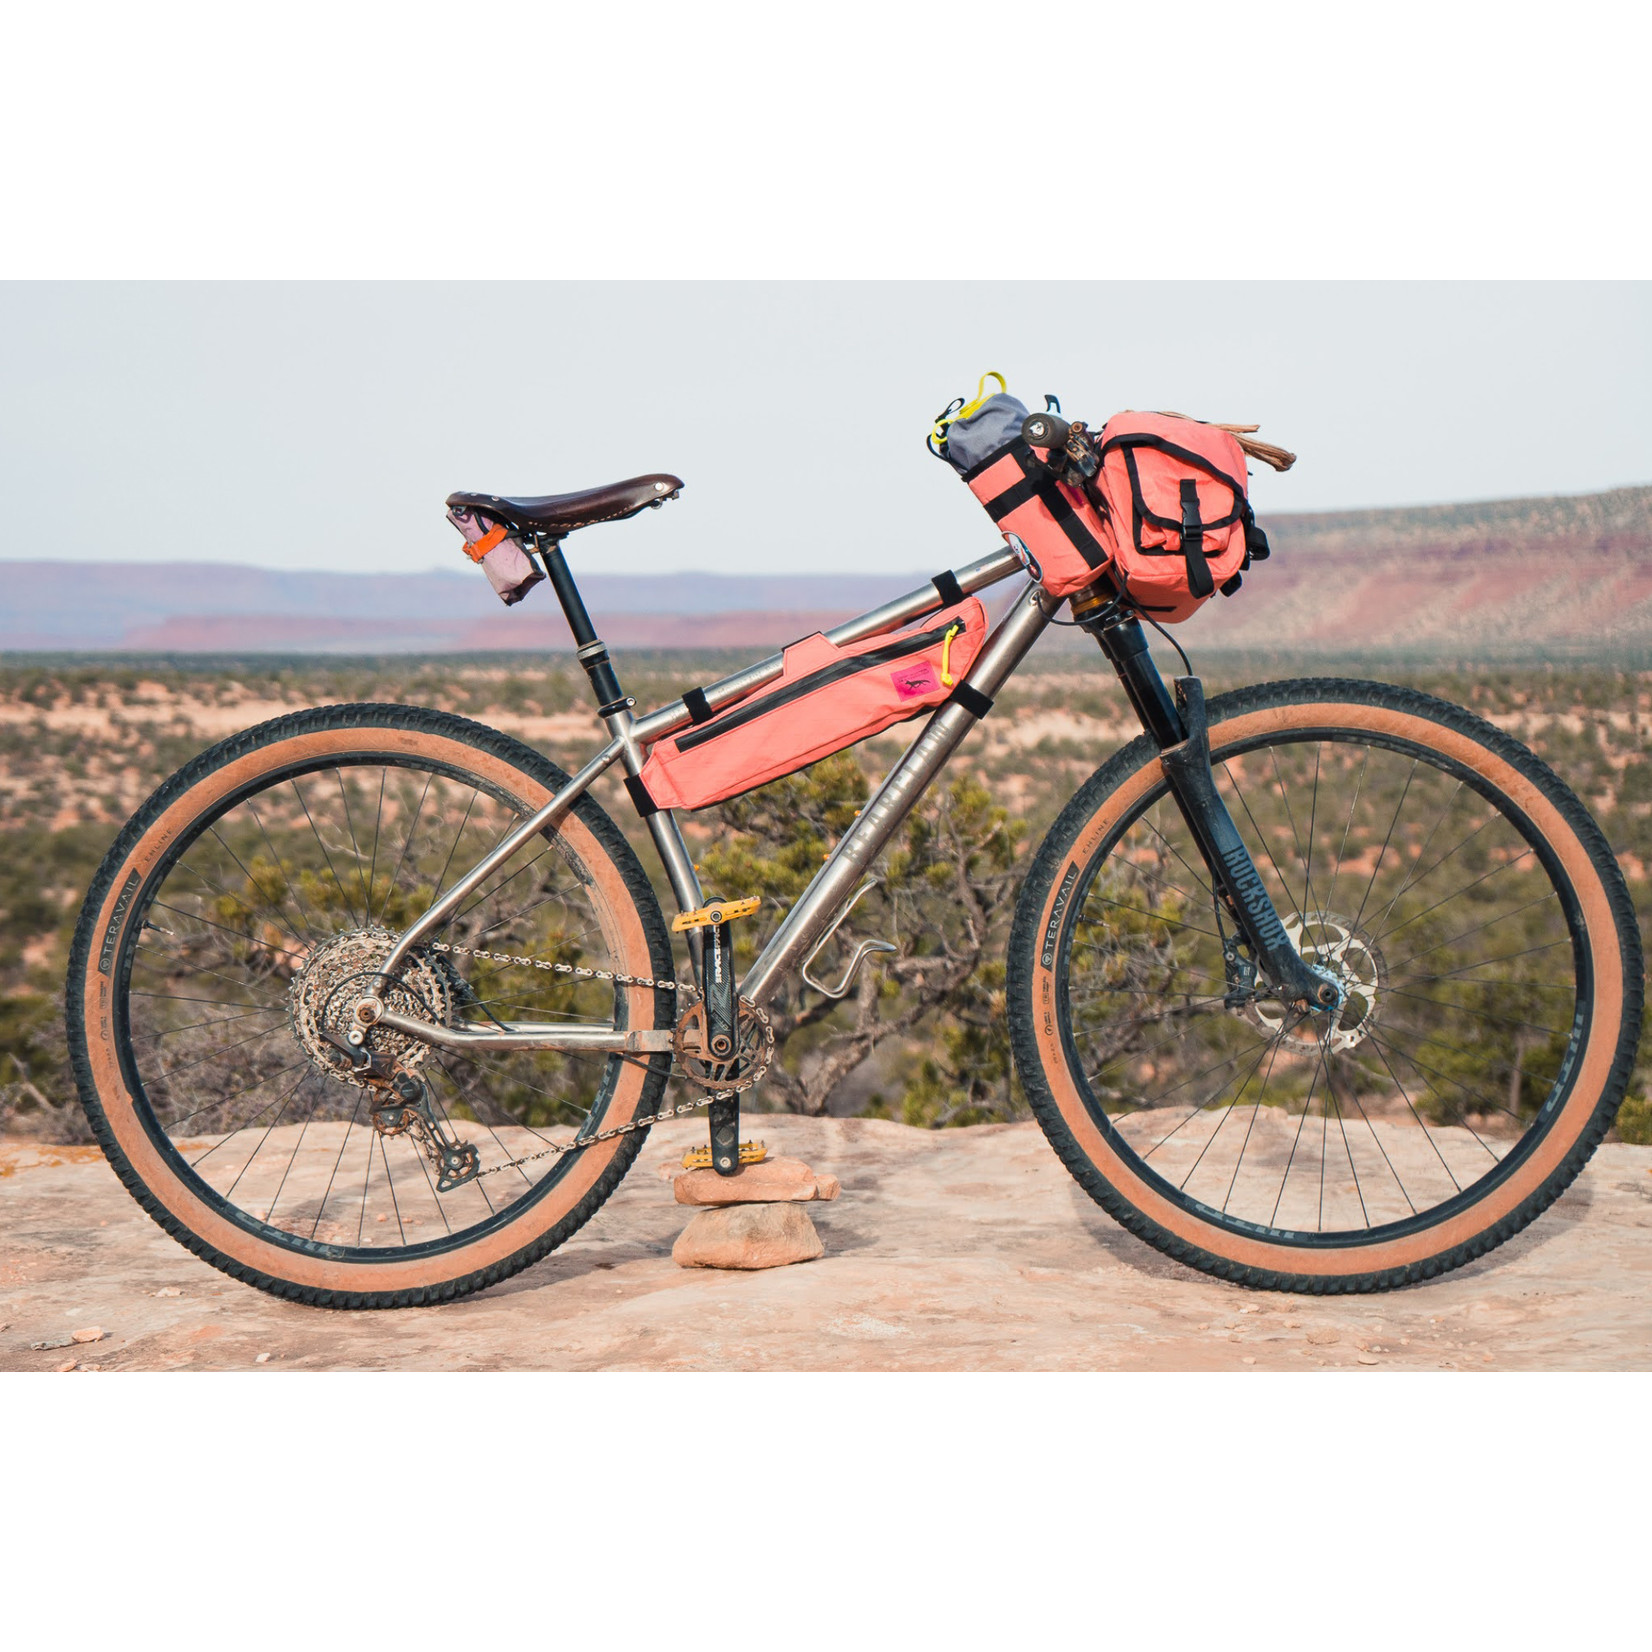 Swift Industries Swift Industries Hold Fast Frame Bag 2022 Campout Edition - Coral